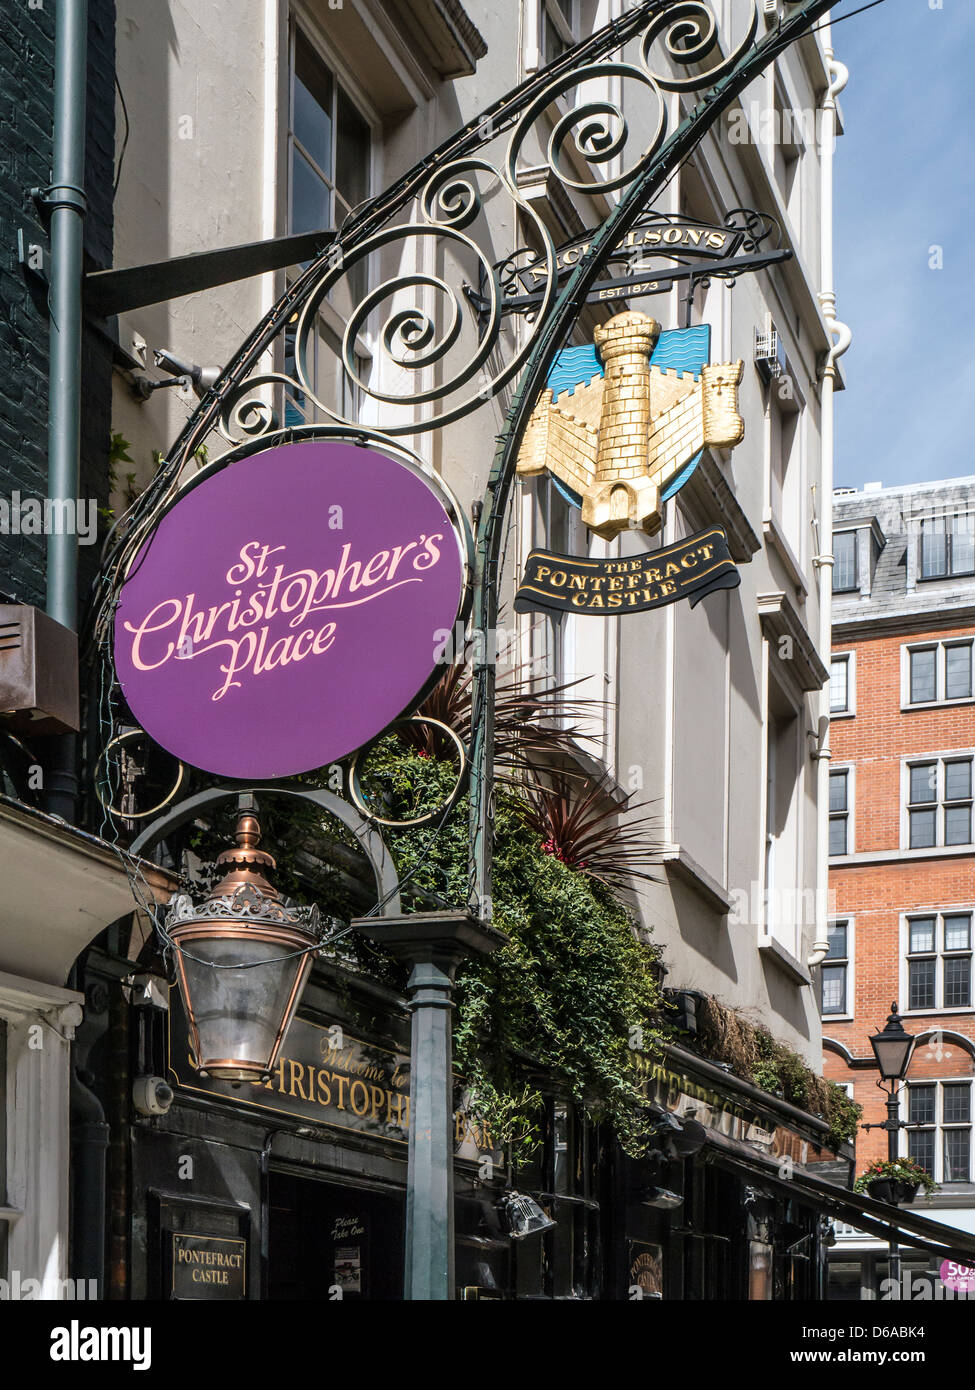 LONDON, UK - APRIL 14, 2013: Street sign at St Christopher's Place in the Westend Stock Photo